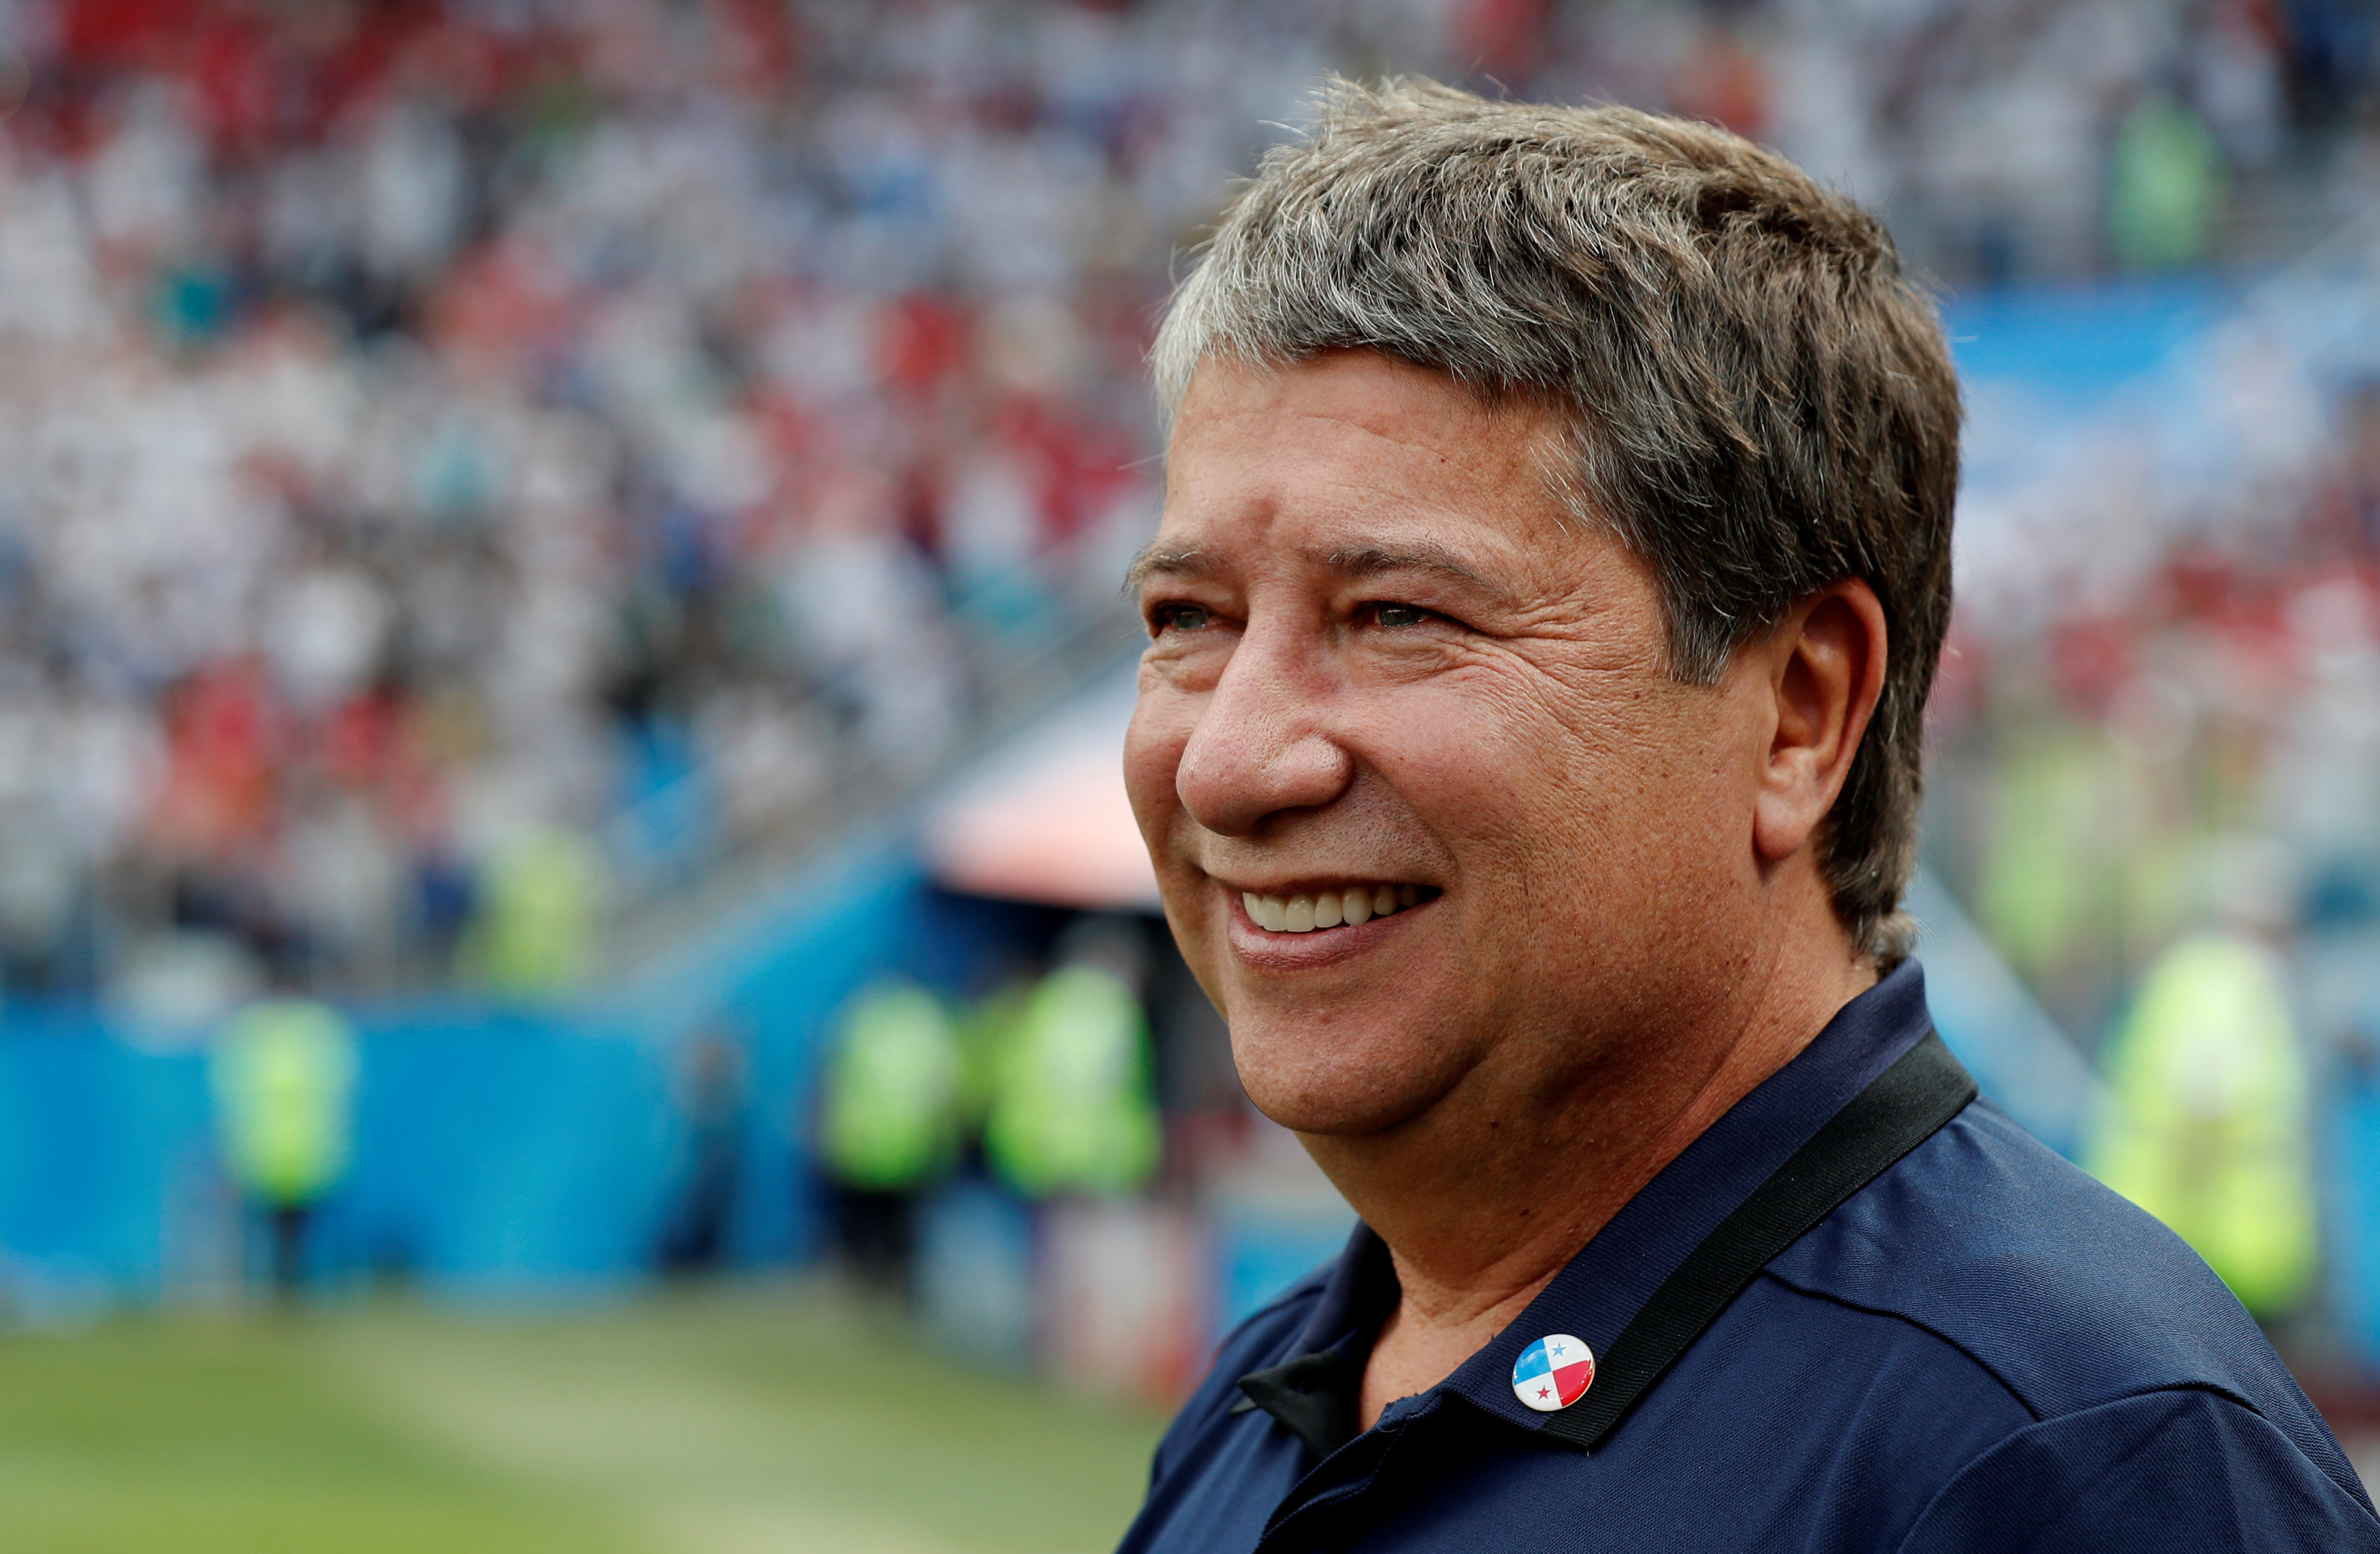 Football: Panama coach says World Cup lessons must be heeded